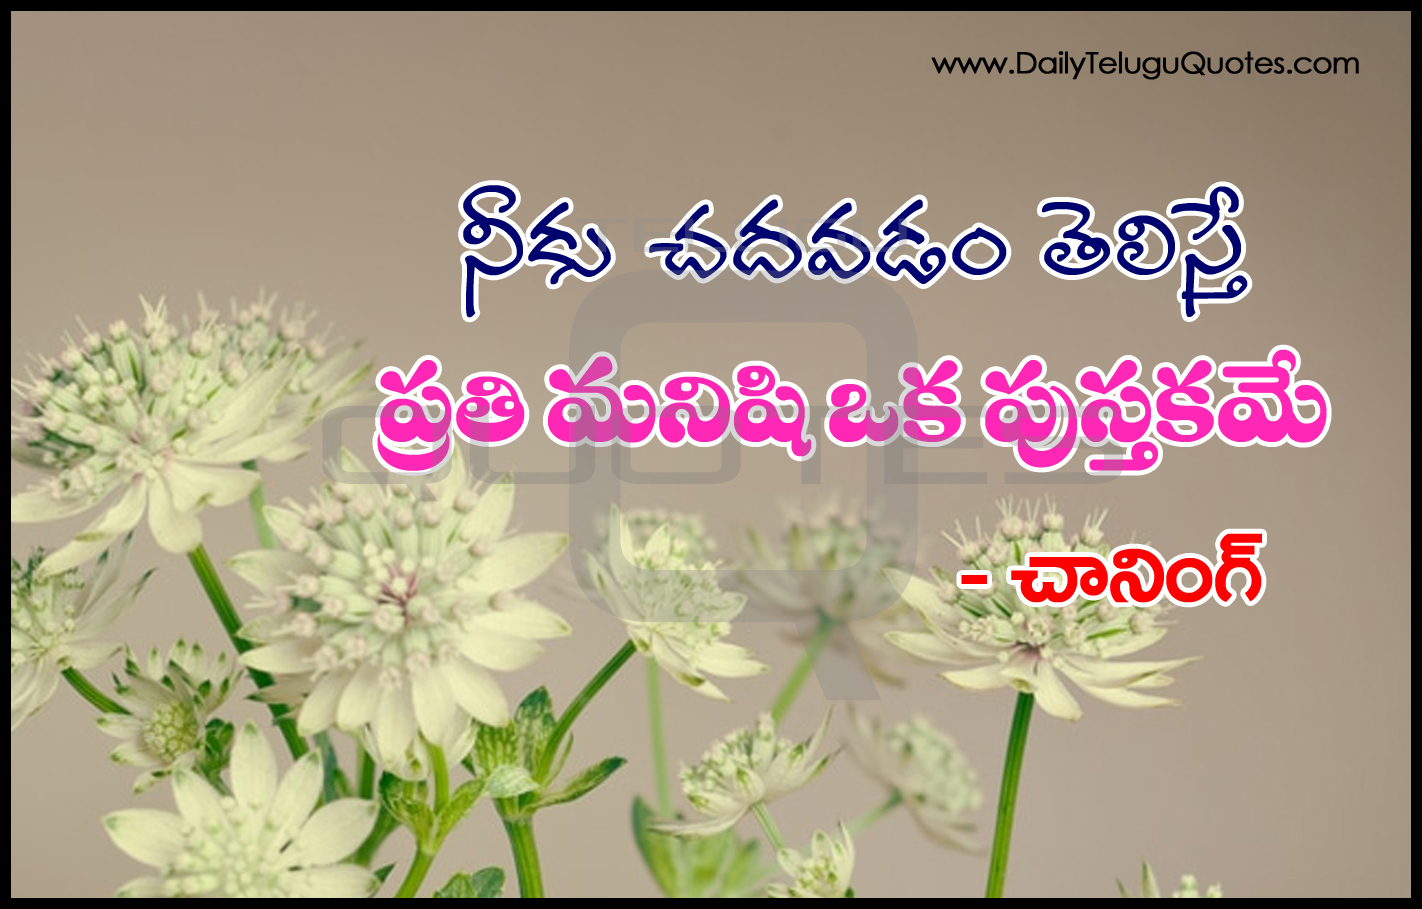 Best Telugu Quotations And Images Life Motivational Quotes